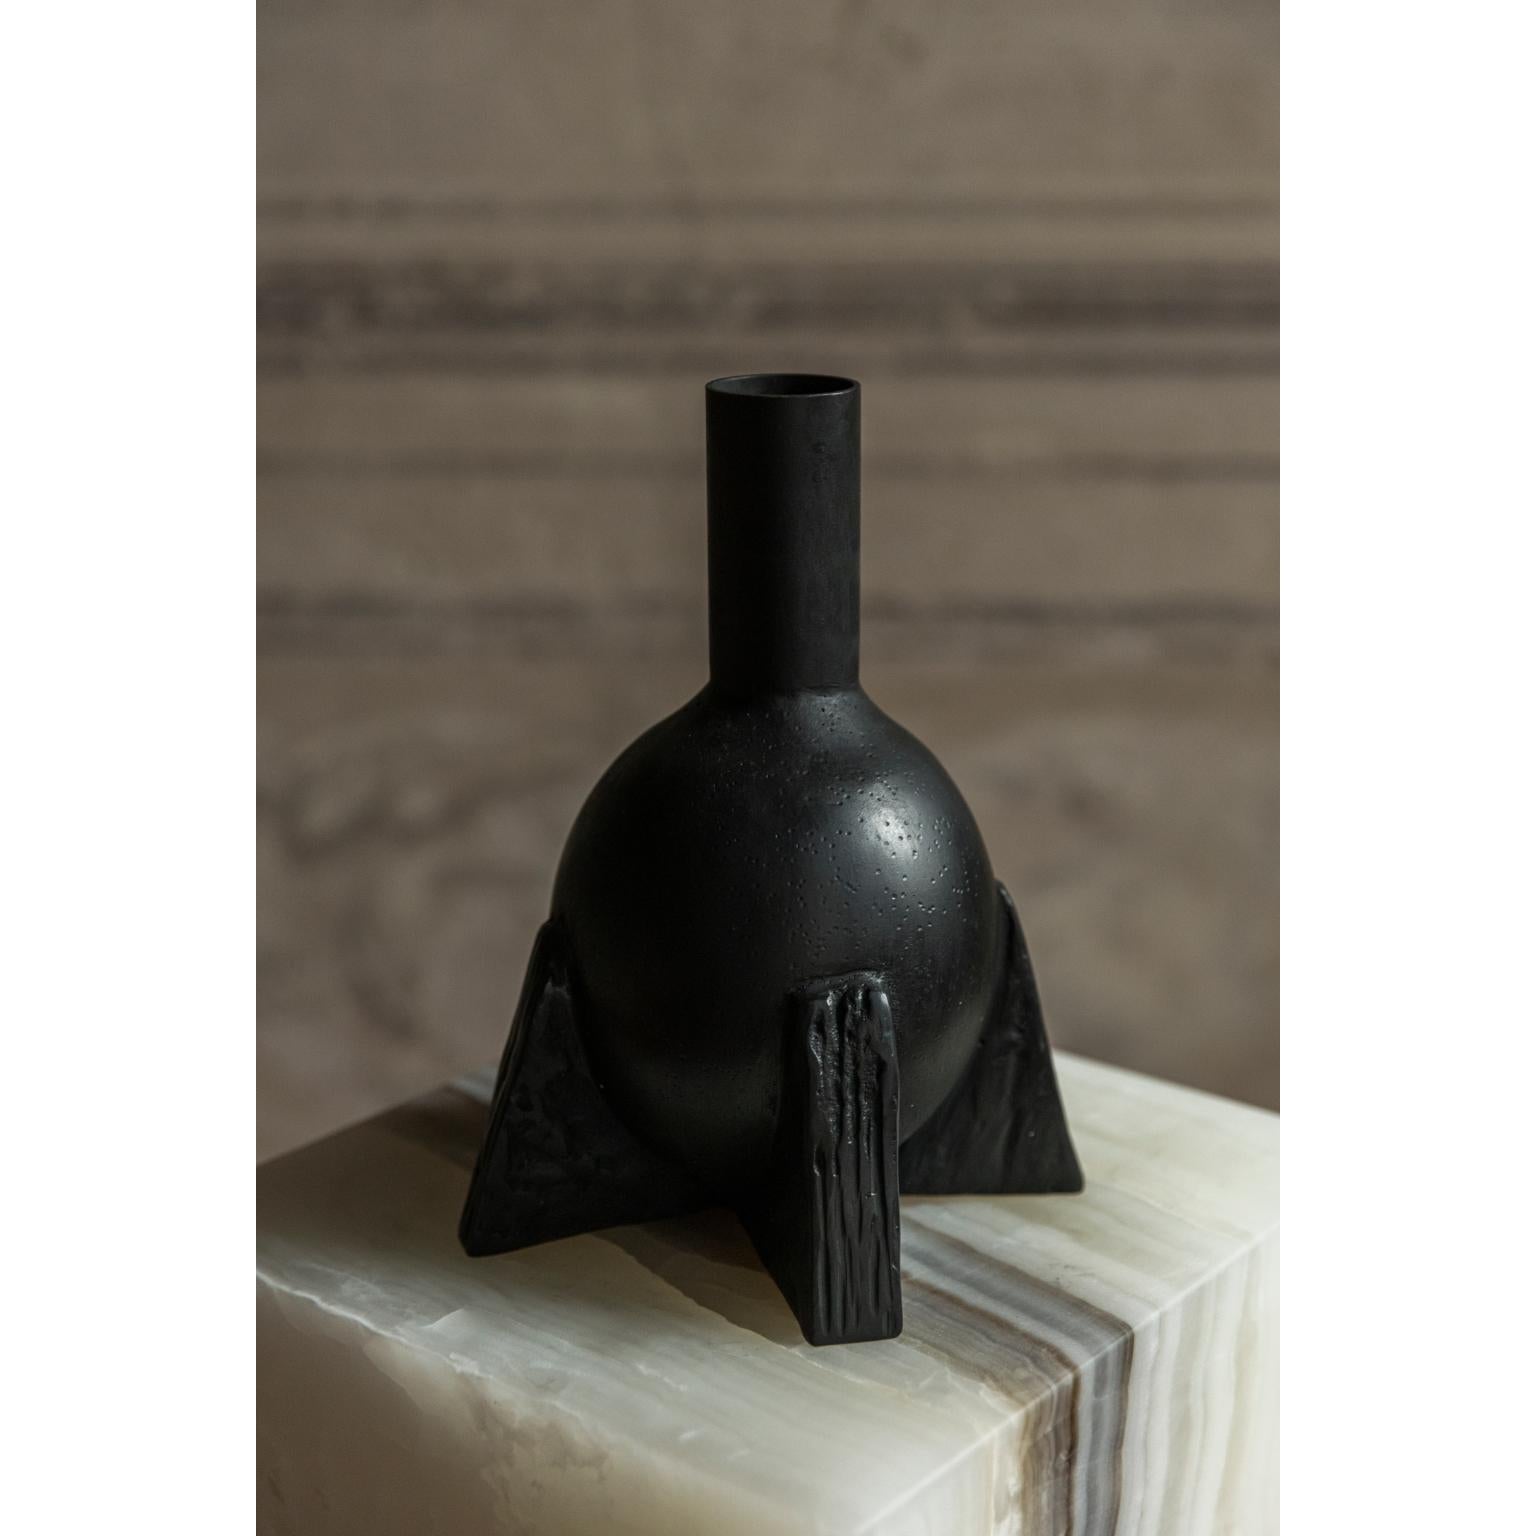 Duck neck by Rick Owens
2007
Dimensions: L 20 x W 20 x H 23 cm
Materials: Bronze
Weight: 3 kg

Available in Black finish or Nitrate (Dark Brown) finish, please contact us.

Rick Owens is a California-born fashion and furniture has developed